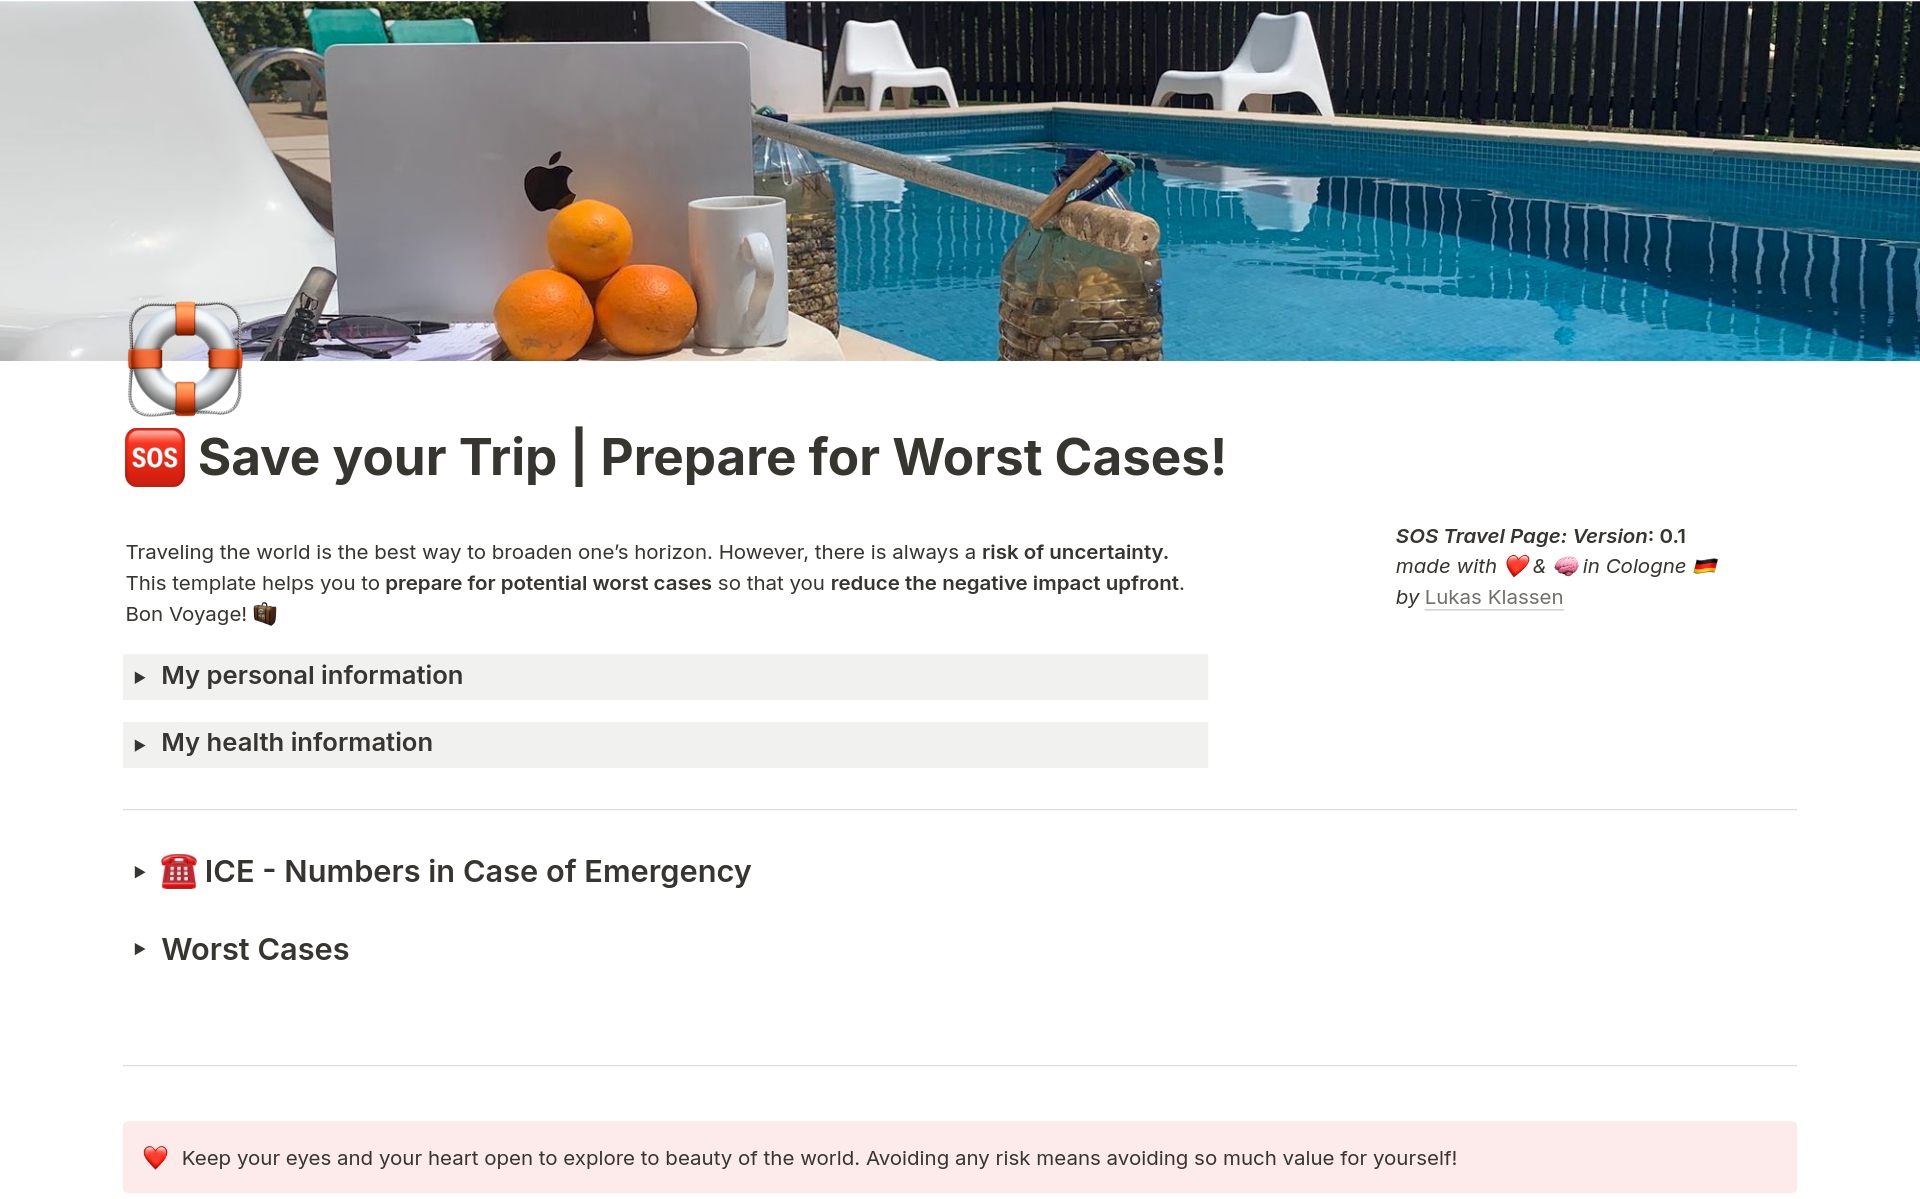 ❤️ Traveling the world is the best way to broaden one’s horizon. 
🆘 However, there is always a risk of uncertainty. 
🛡️ This template helps you to prepare for worst cases and reduce negative impact upfront. 
🧘‍♀️ Get peace of mind by being prepared